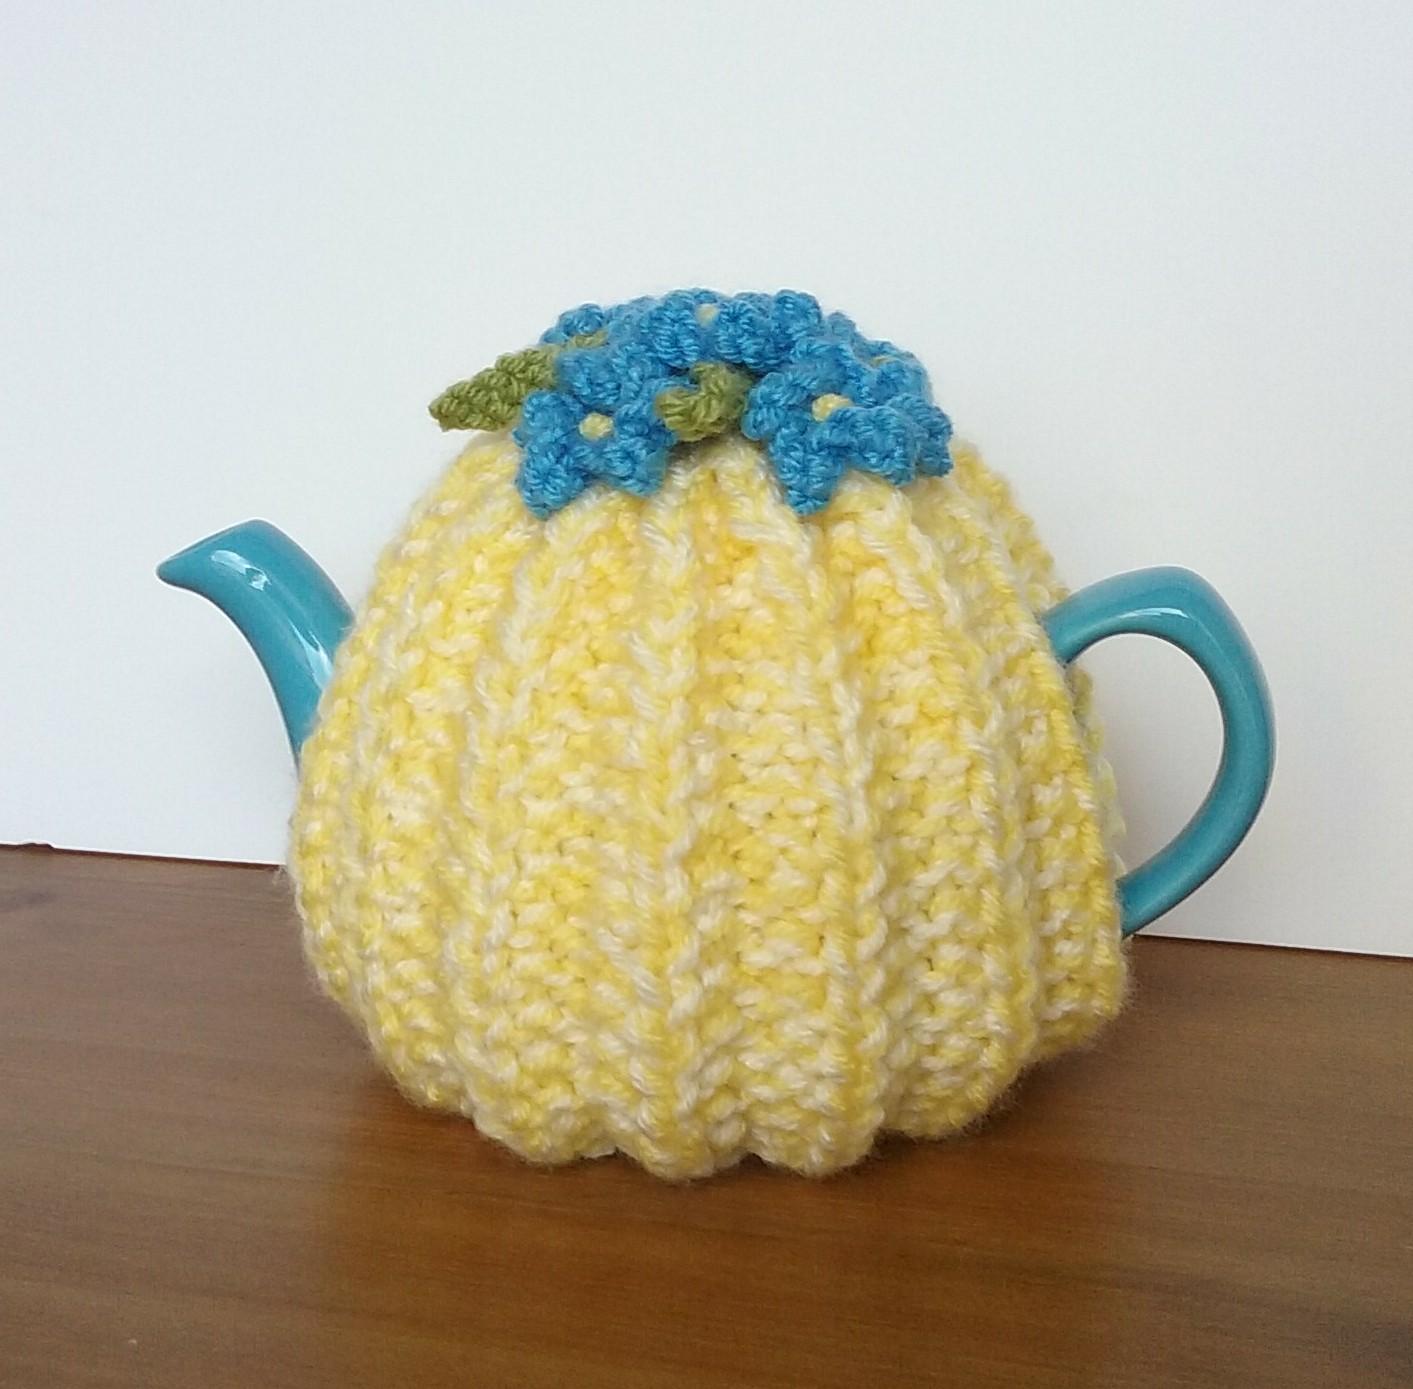 Traditional Squares 1.5-2 Pints Hand Knitted Tea Cosy for Medium Size Tea Pot